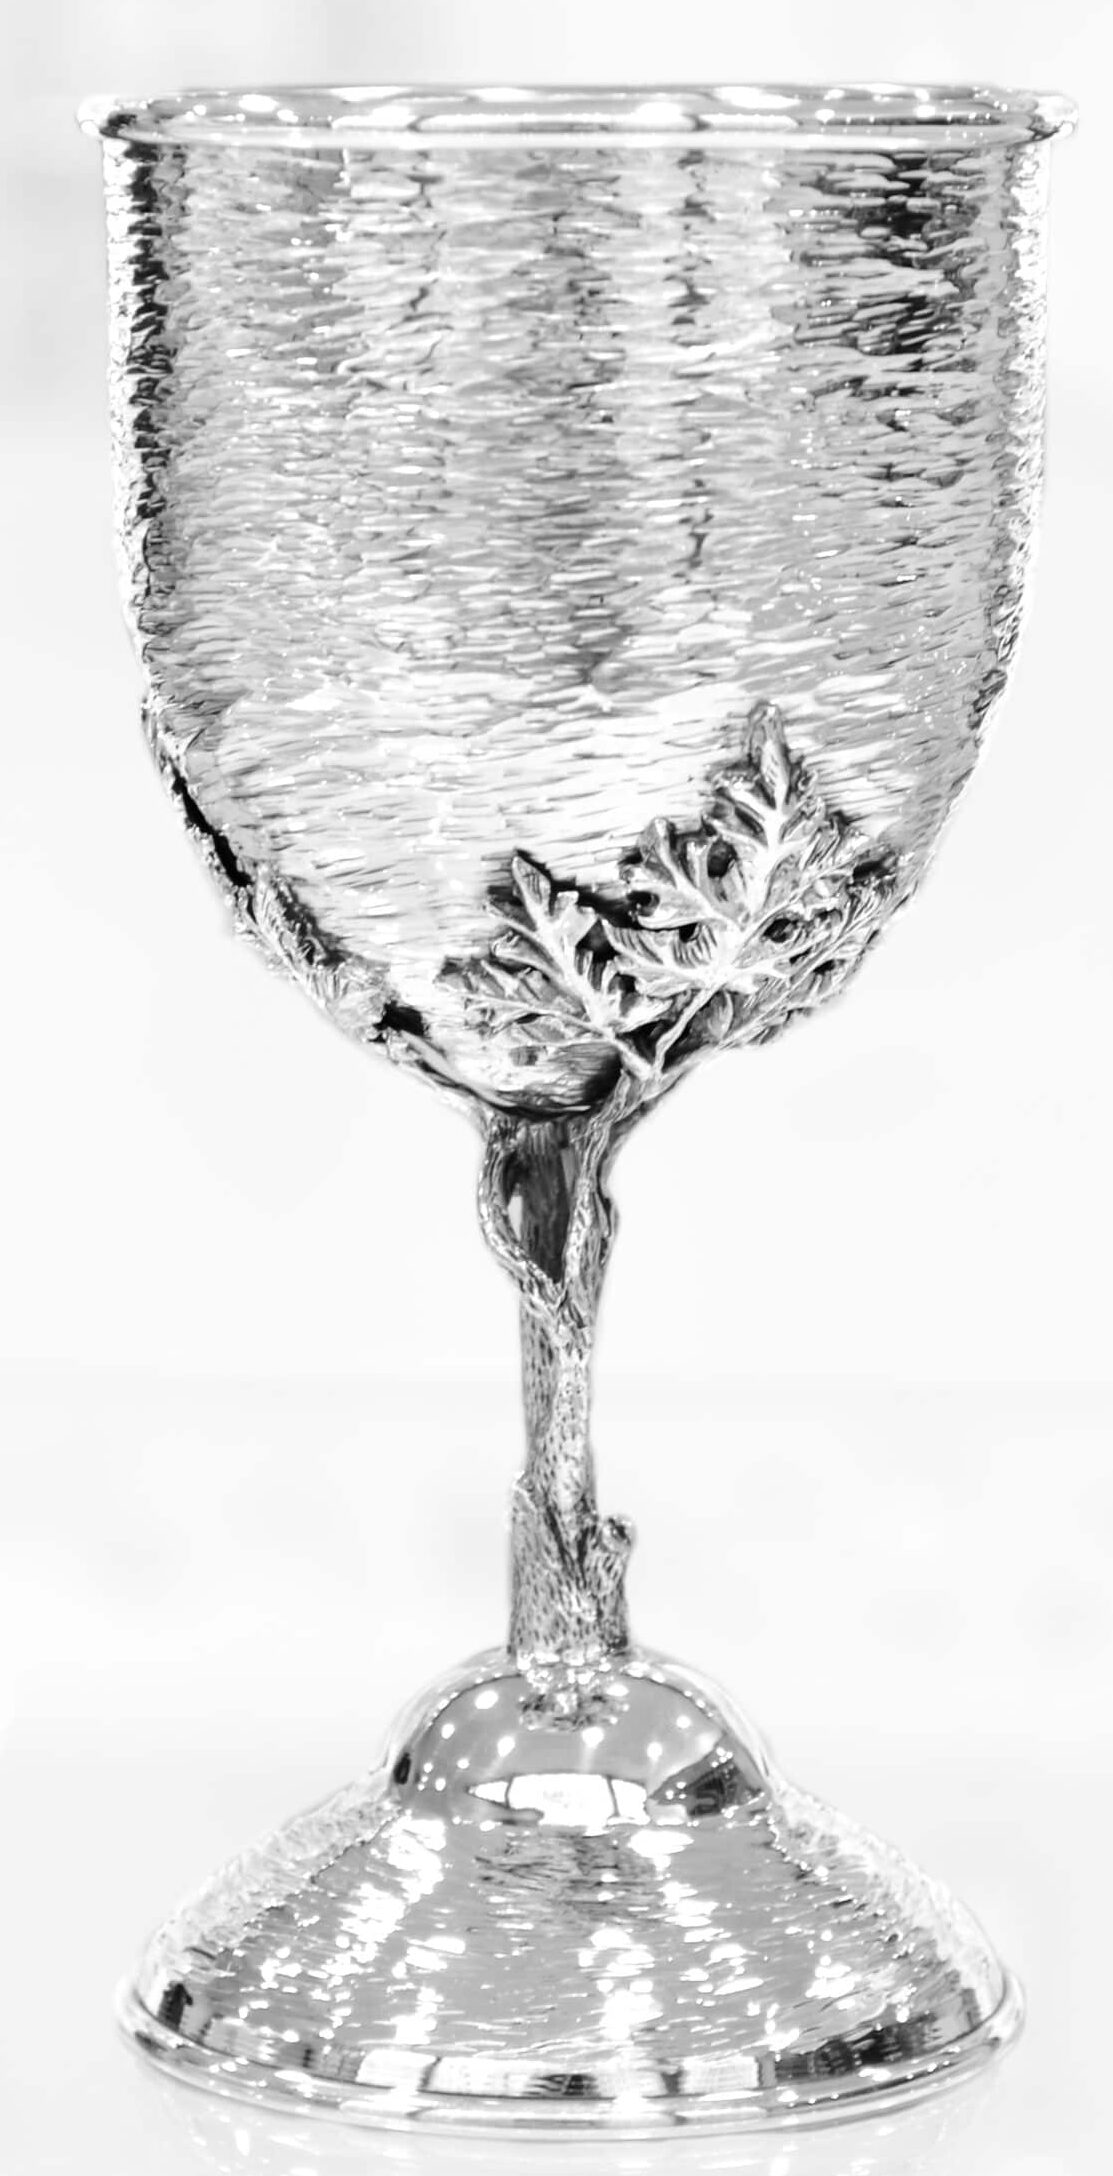 Hammered Kiddush Cup with Unique Stem